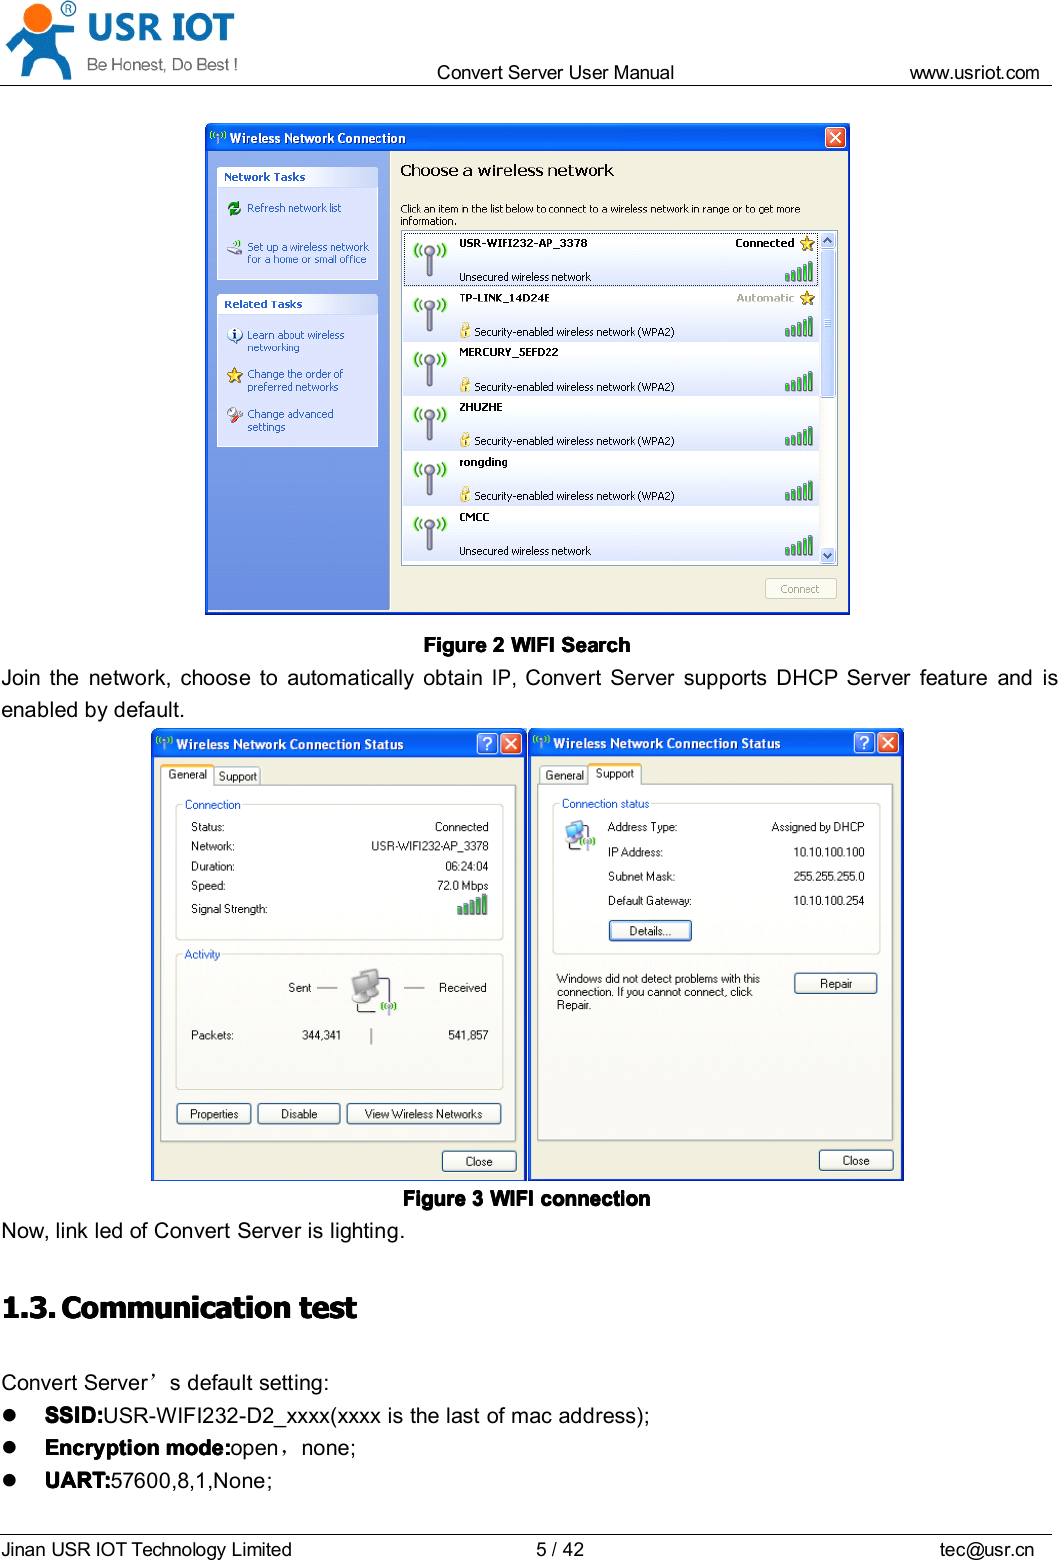 Convert Server User Manual www.usr iot.c omJinan USR IOT Technology Limited 5/42 tec@usr.cnFigureFigureFigureFigure 2222 WIFIWIFIWIFIWIFI SearchSearchSearchSearchJoin the network, choose to automatically obtainIP,Convert Server supports DHCP Server feature and isenabled by default.FigureFigureFigureFigure 3333 WIFIWIFIWIFIWIFI connectionconnectionconnectionconnectionNow, link led of Convert Server is lighting.1.3.1.3.1.3.1.3. CCCC ommunicationommunicationommunicationommunication testtesttesttestConvert Server ’s default setting:SSID:SSID:SSID:SSID: USR-WIFI232-D2_xxxx(xxxx is the last of mac address);EncryptionEncryptionEncryptionEncryption modemodemodemode ::::open ，none ;UART:UART:UART:UART: 57600 ,8,1,None ;